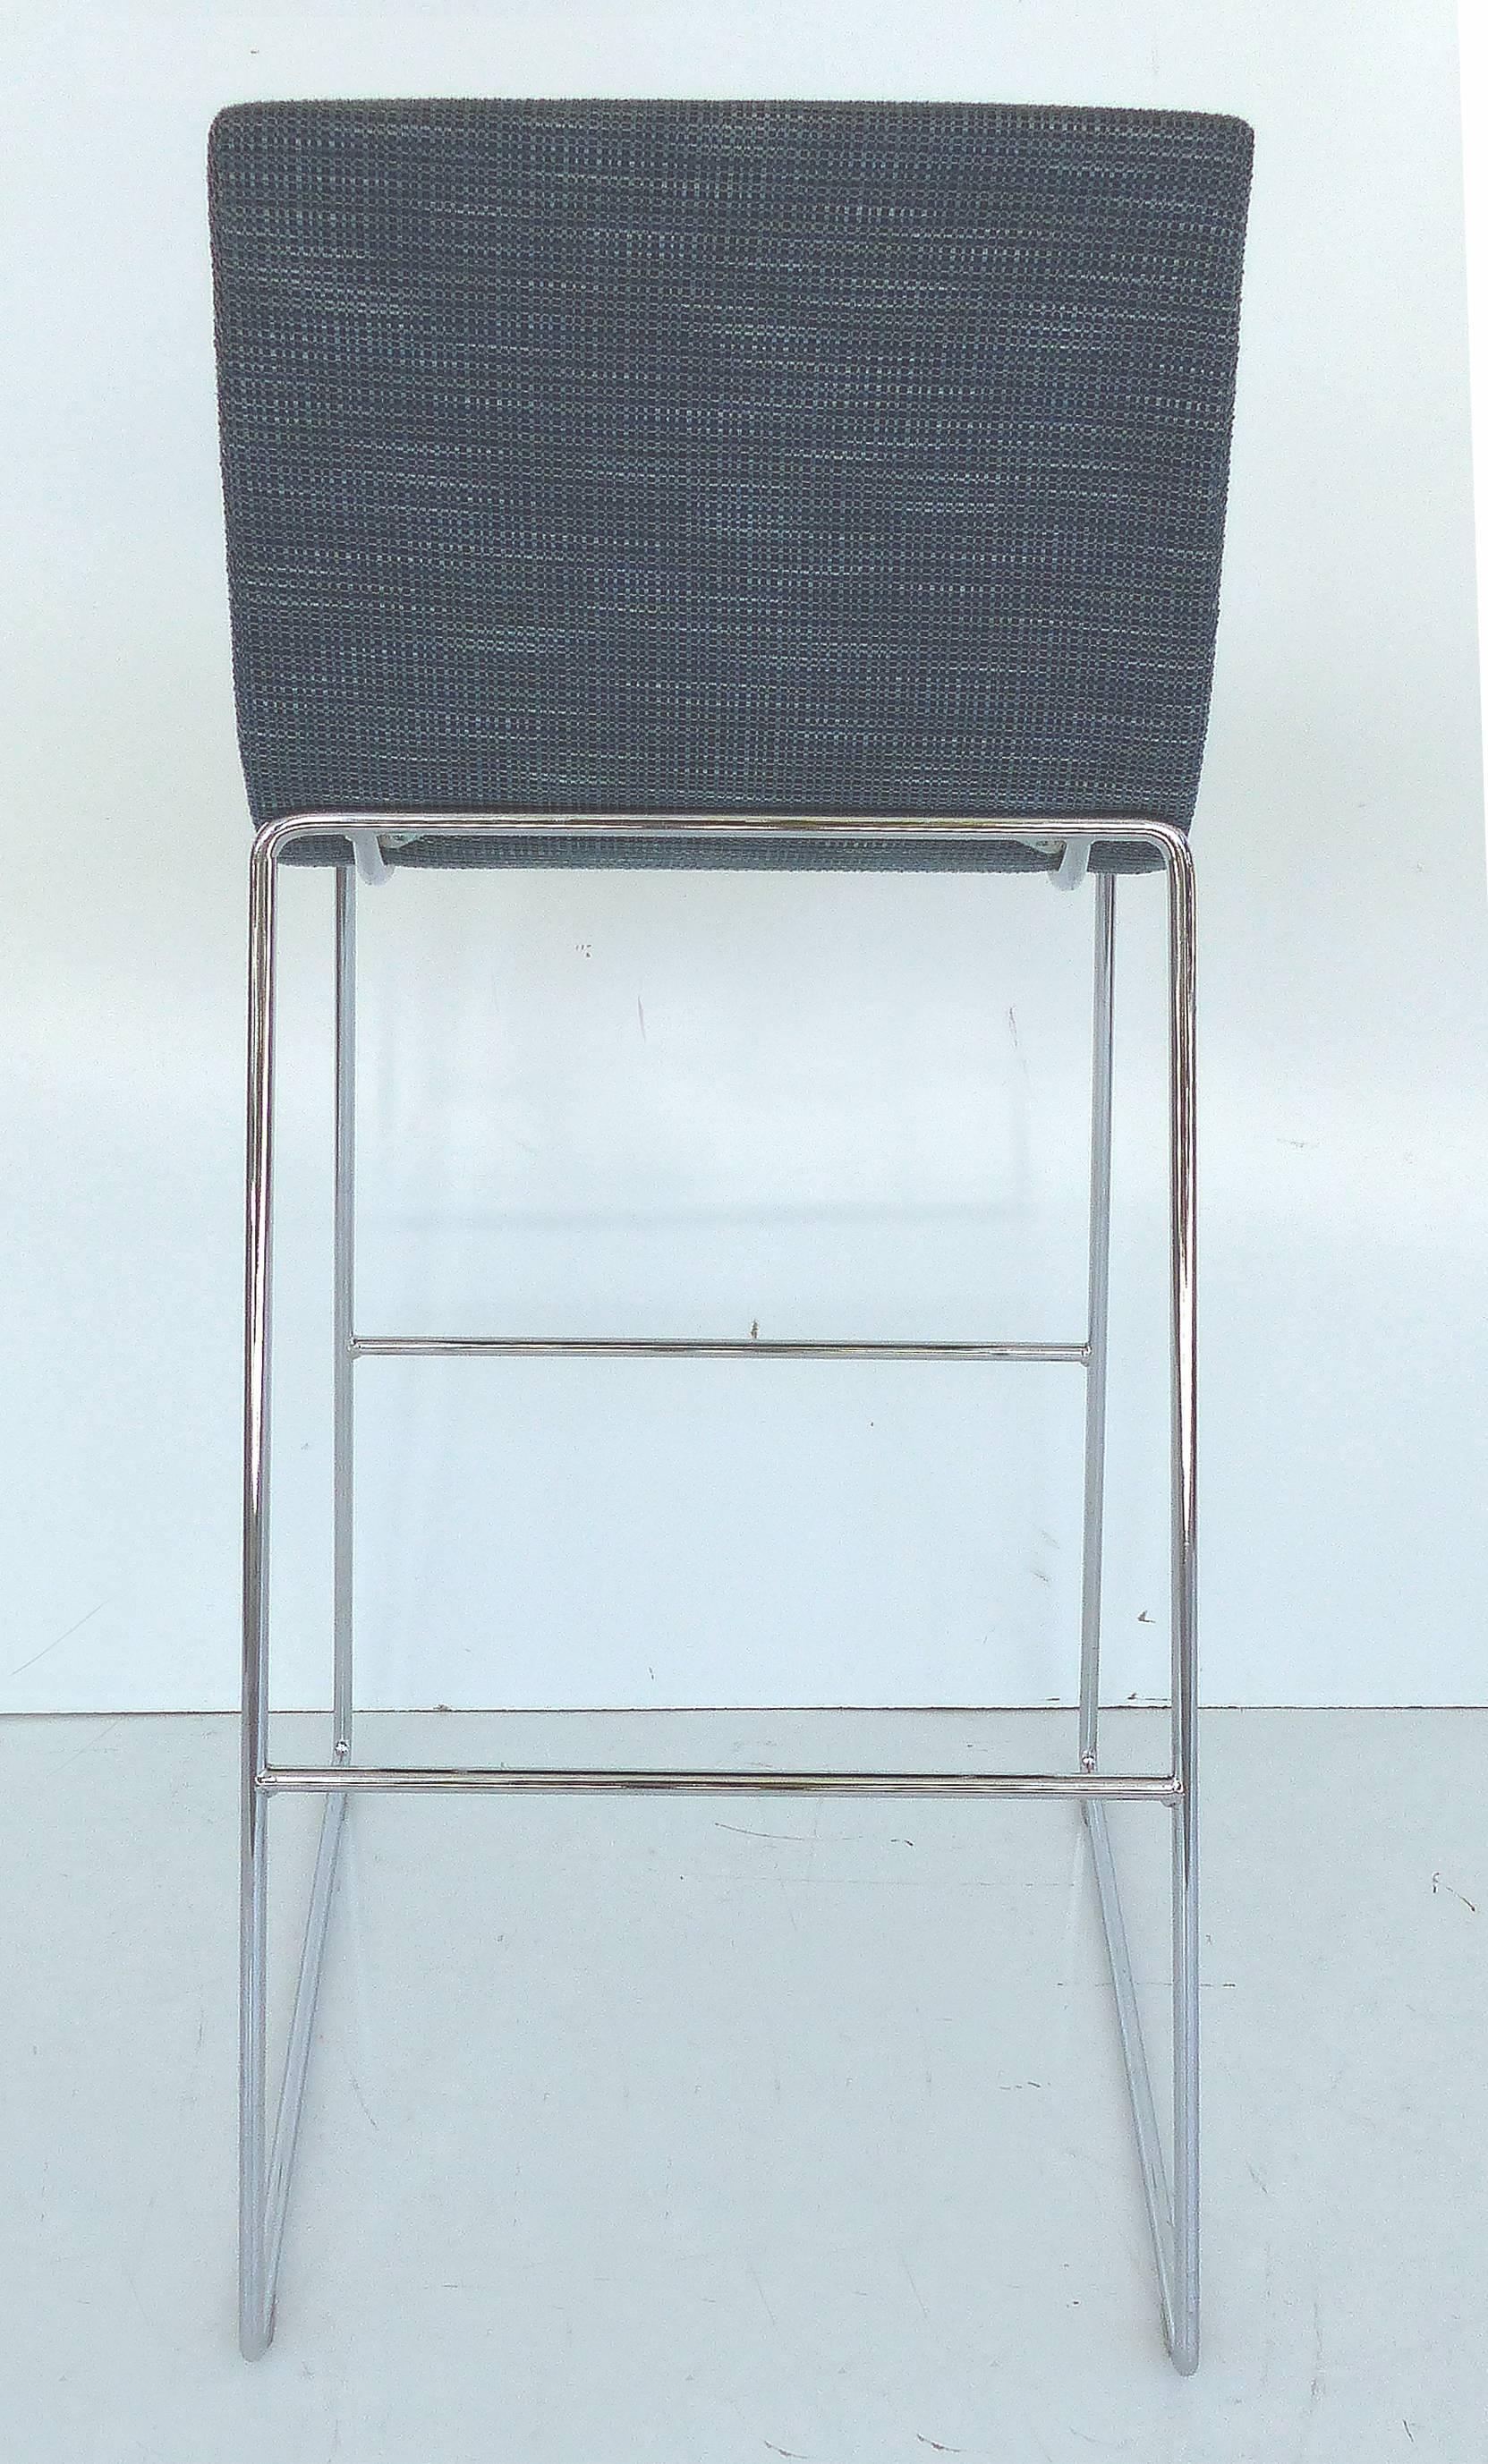 Spanish Set of Five Contemporary Upholstered Bar Stools in Stainless Steel, per item